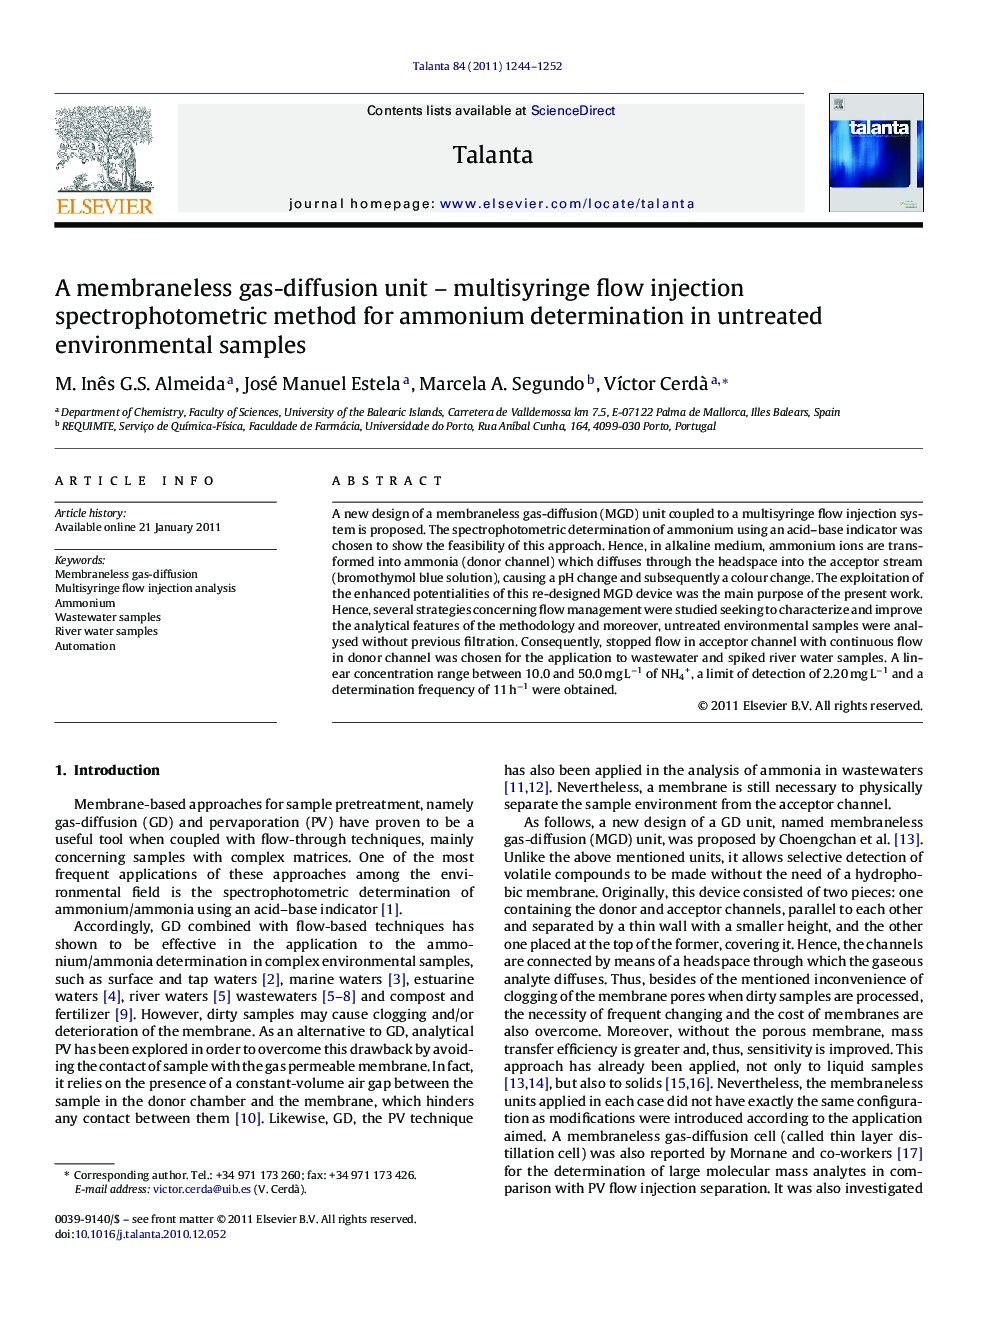 A membraneless gas-diffusion unit - multisyringe flow injection spectrophotometric method for ammonium determination in untreated environmental samples